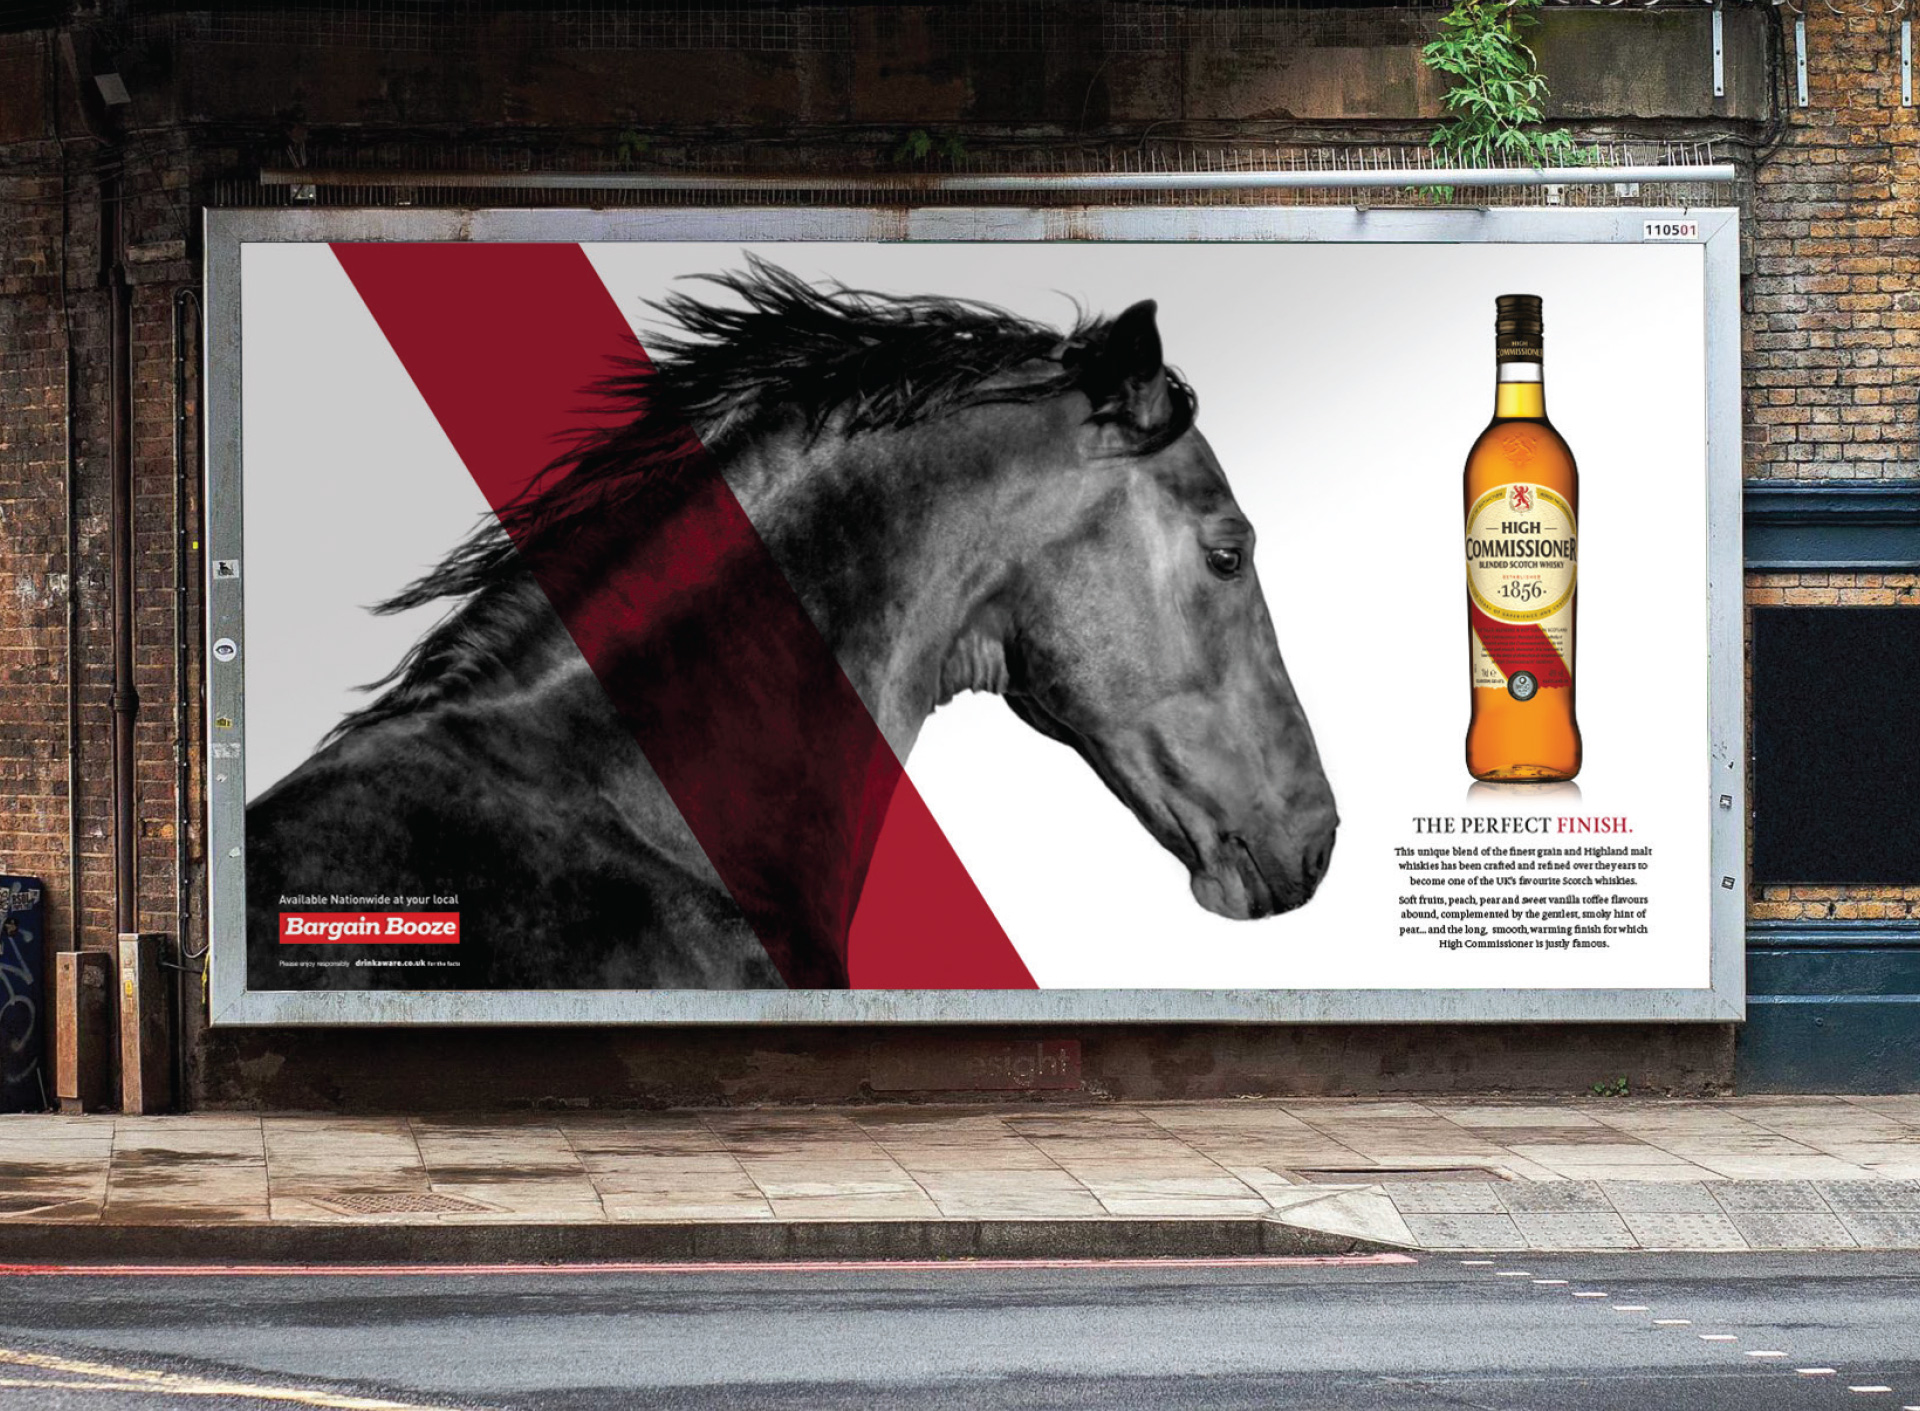 High Commissioner Whisky Bill Board Advertising